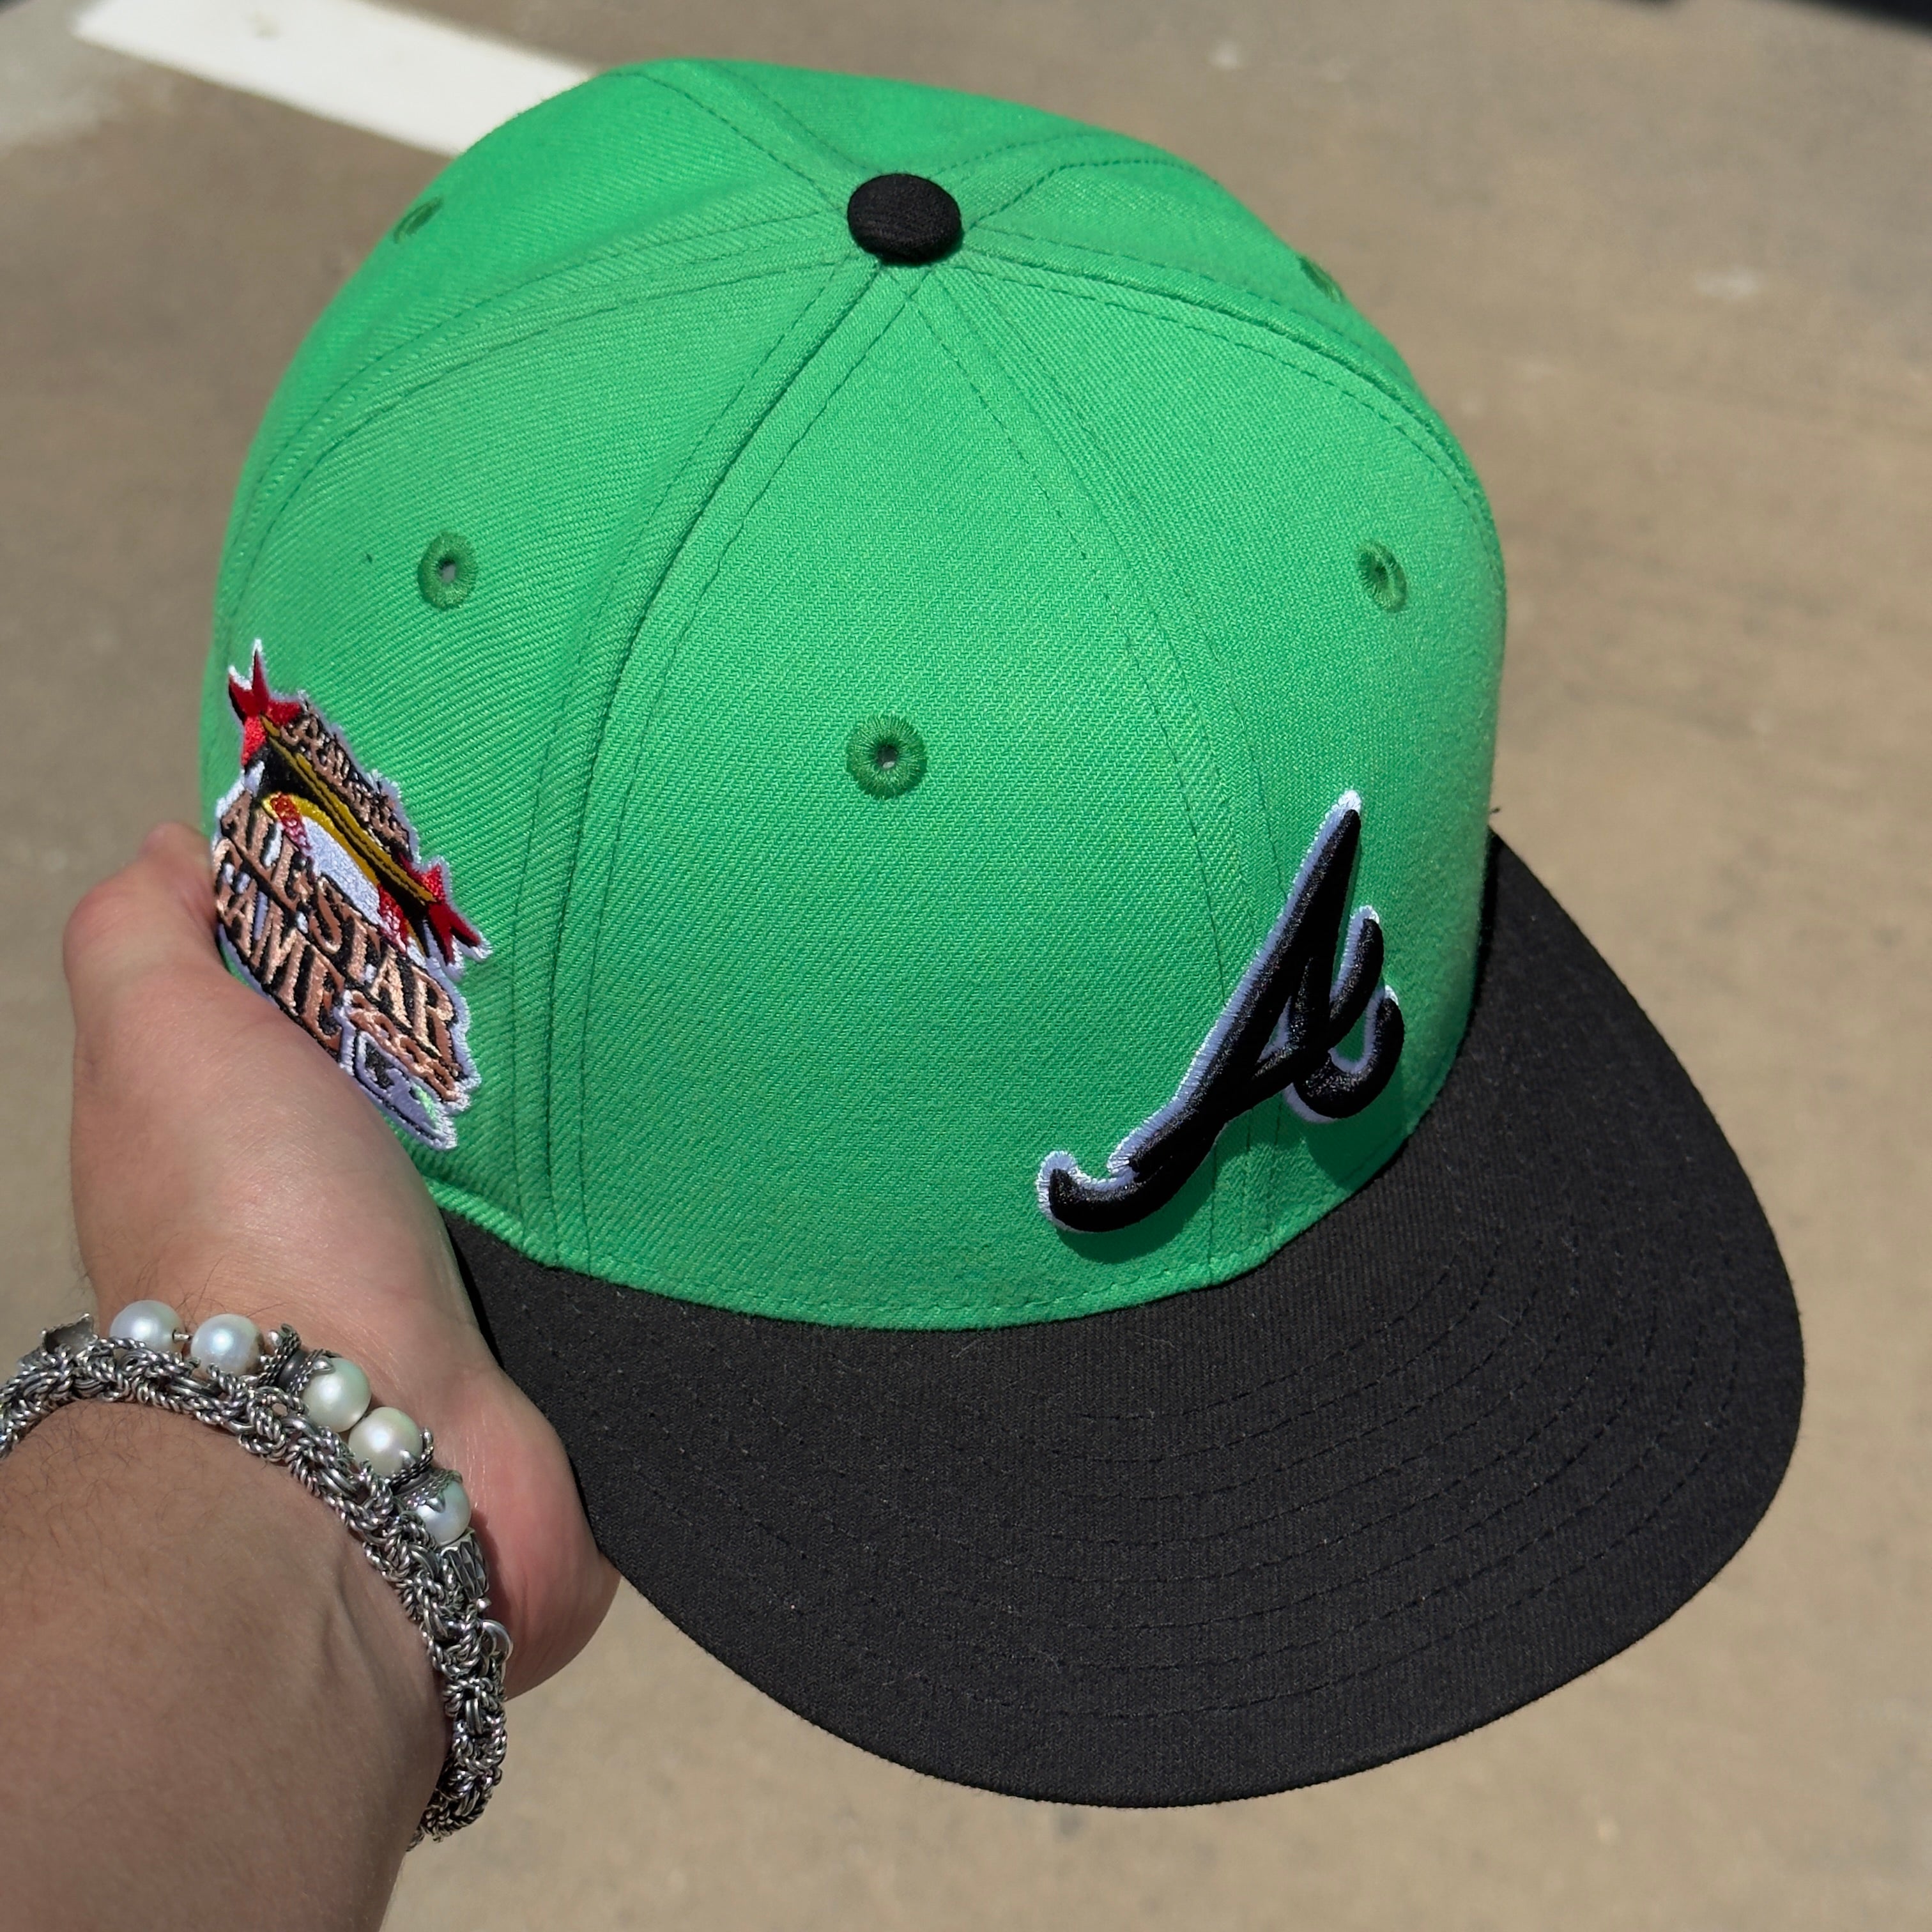 USED 3/8 Green Atlanta Braves All Star Game 2000 59FIFTY New Era Fitted Hat Cap